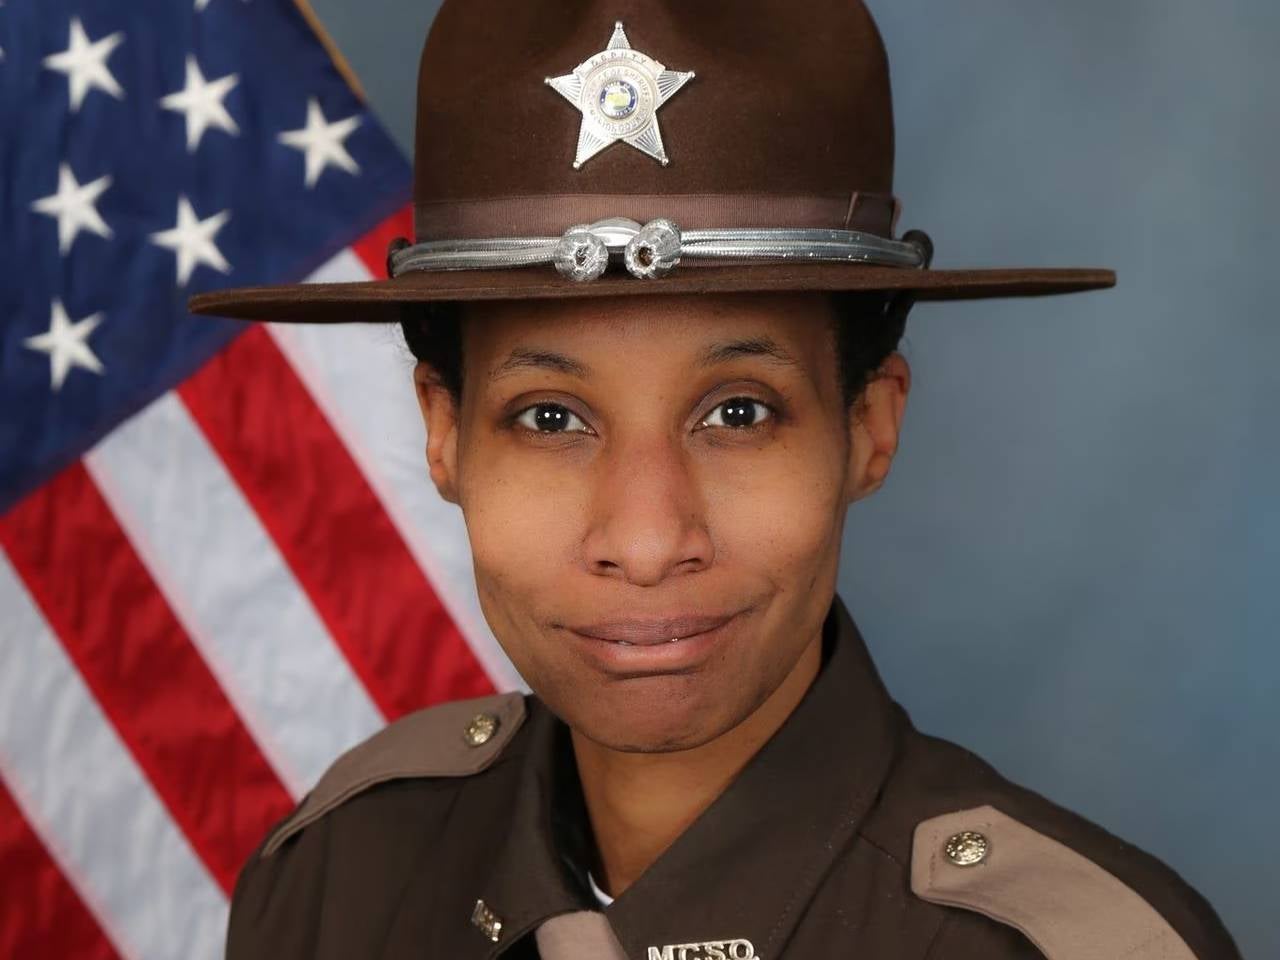 Indiana sheriff’s deputy Tamieka White was killed as she tried to protect her eight-year-old son when a dog they were watching attacked them at their home